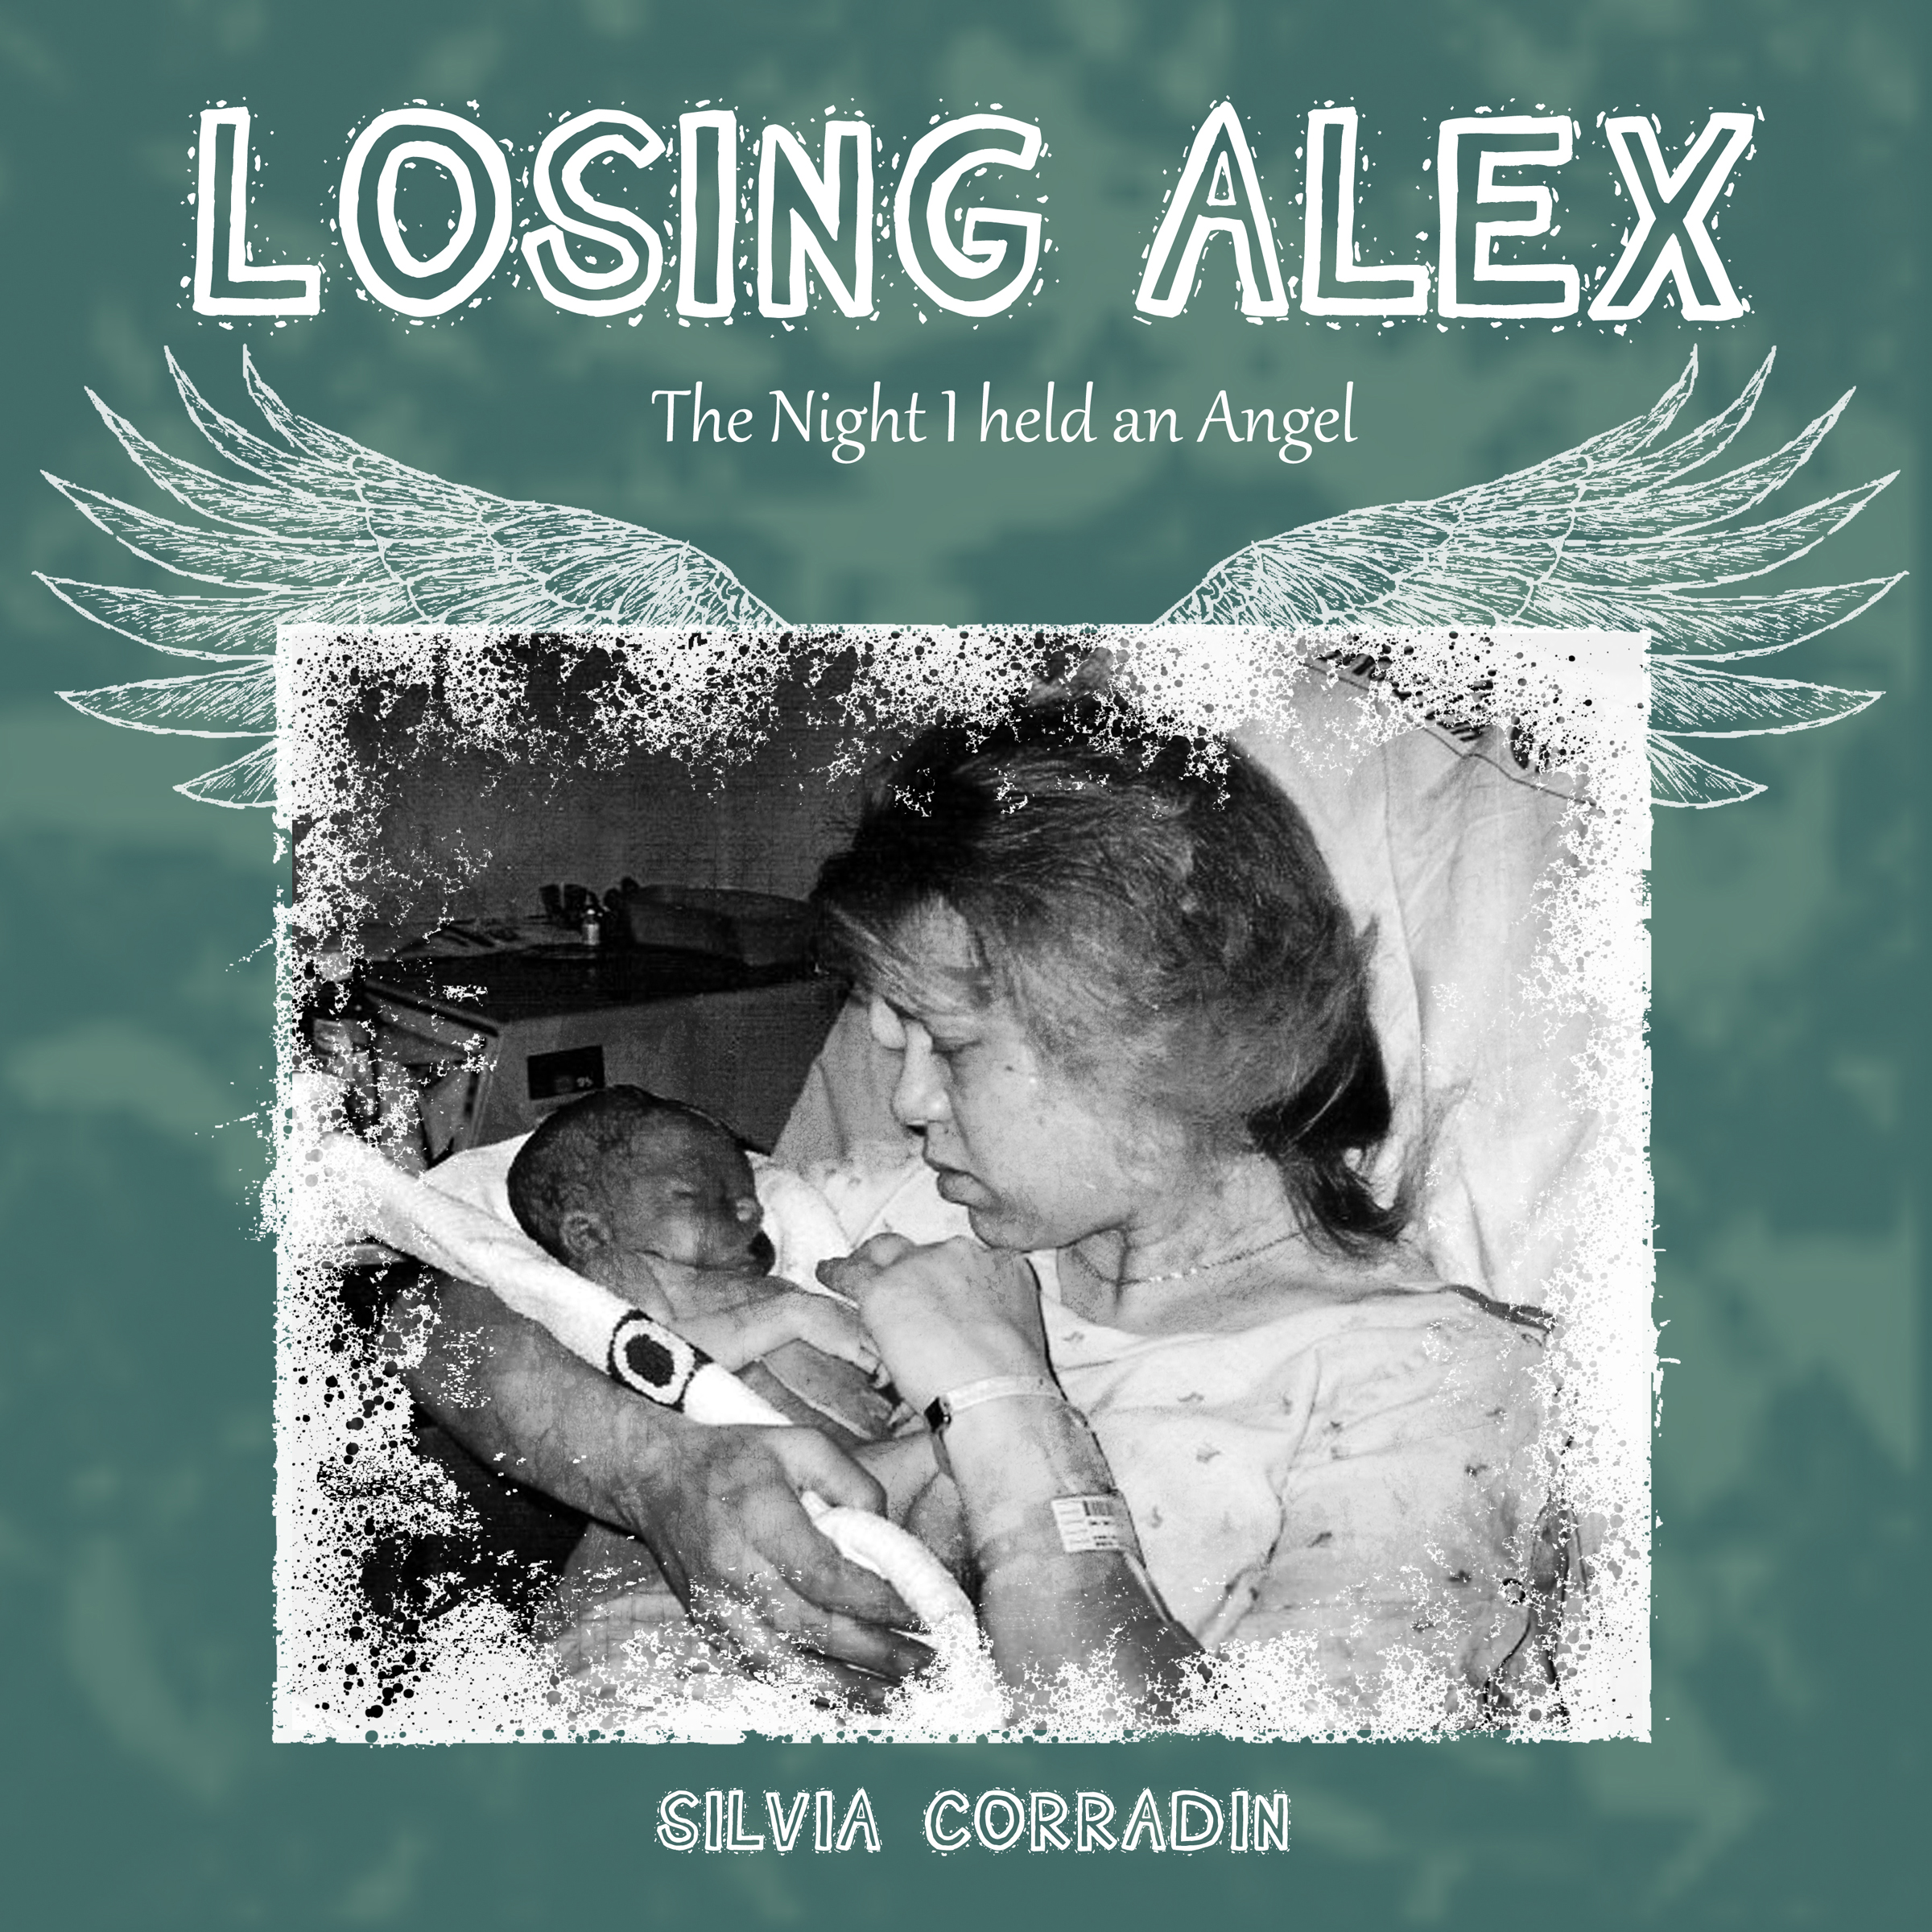 Losing Alex now an Audiobook!!